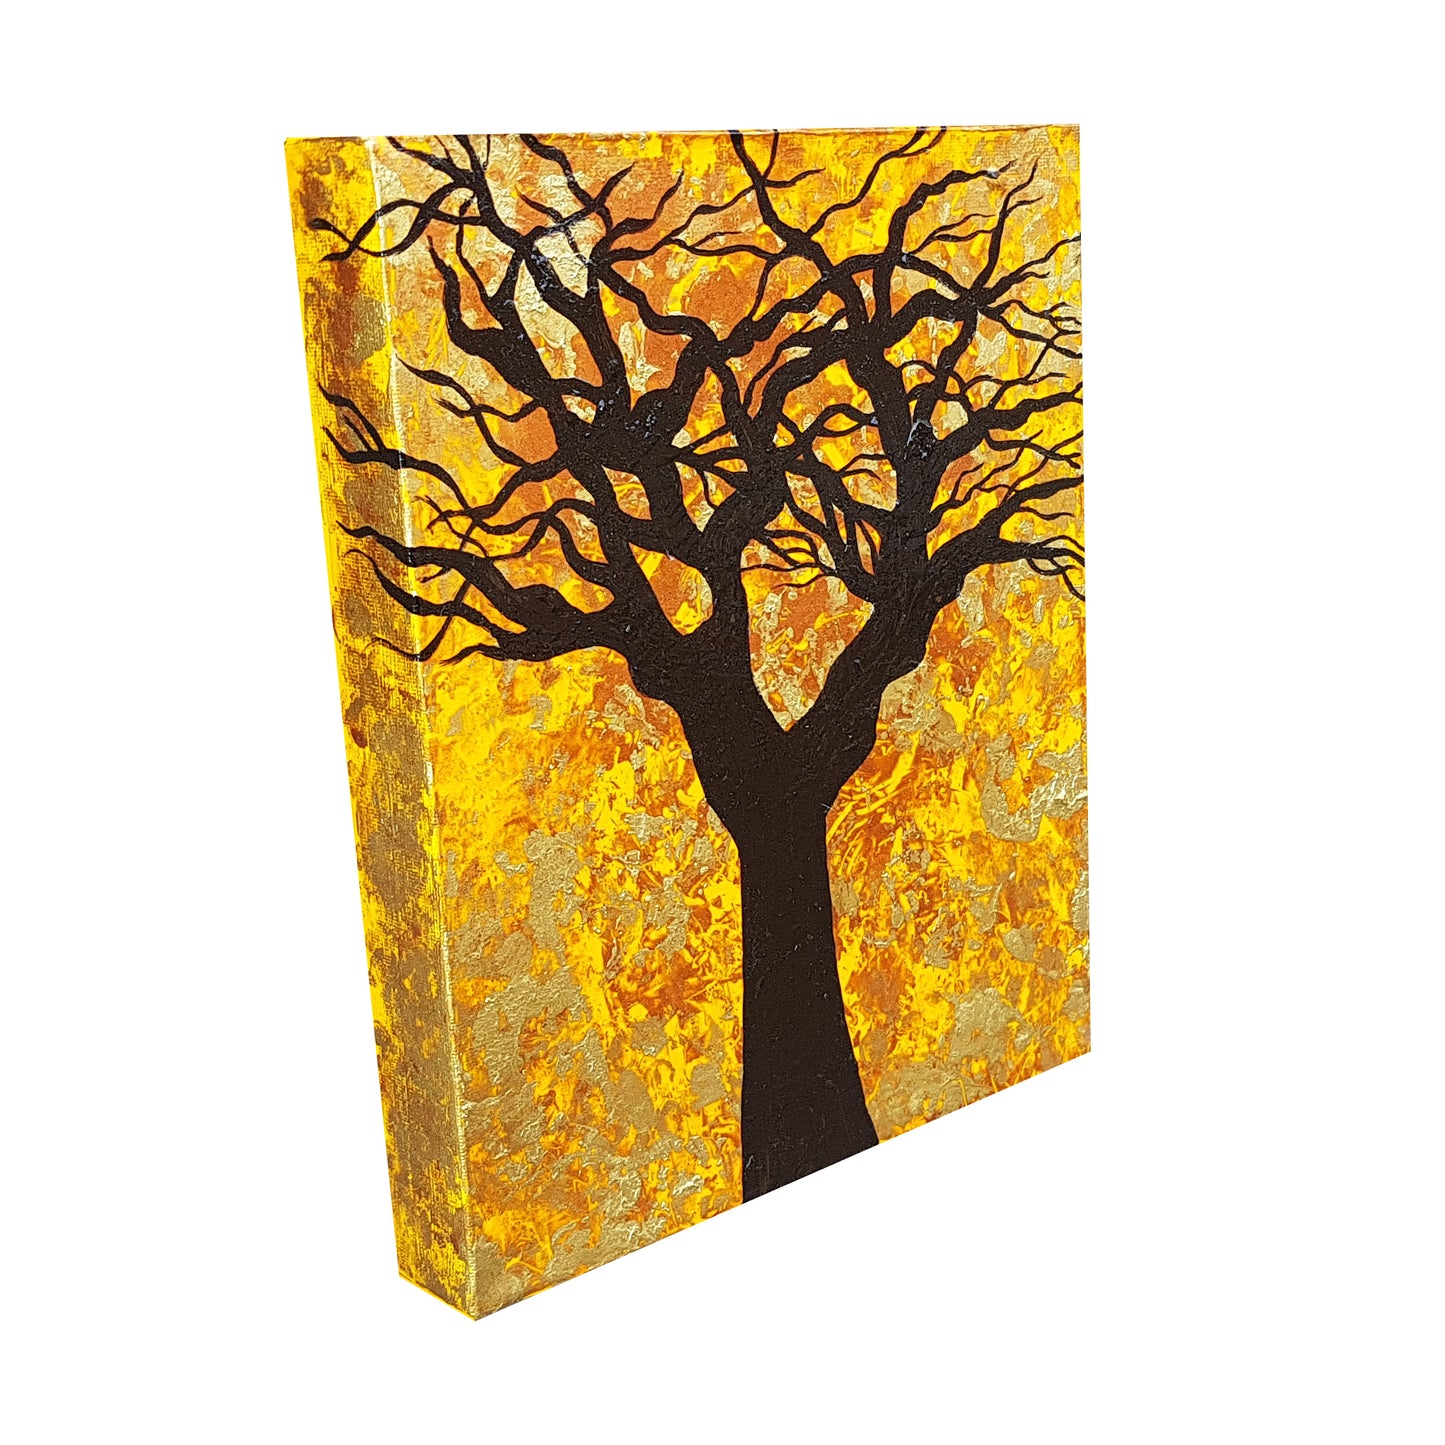 The-Root-of-Evil-by-Alexandra-Romano-Original-Amazing-Tree-Painting-Abstract-Expressionism-Impressionism-Artwork-Yellow-Gold-Black-Copper-Beautiful-Art-Gallery-In-Toronto-Canada